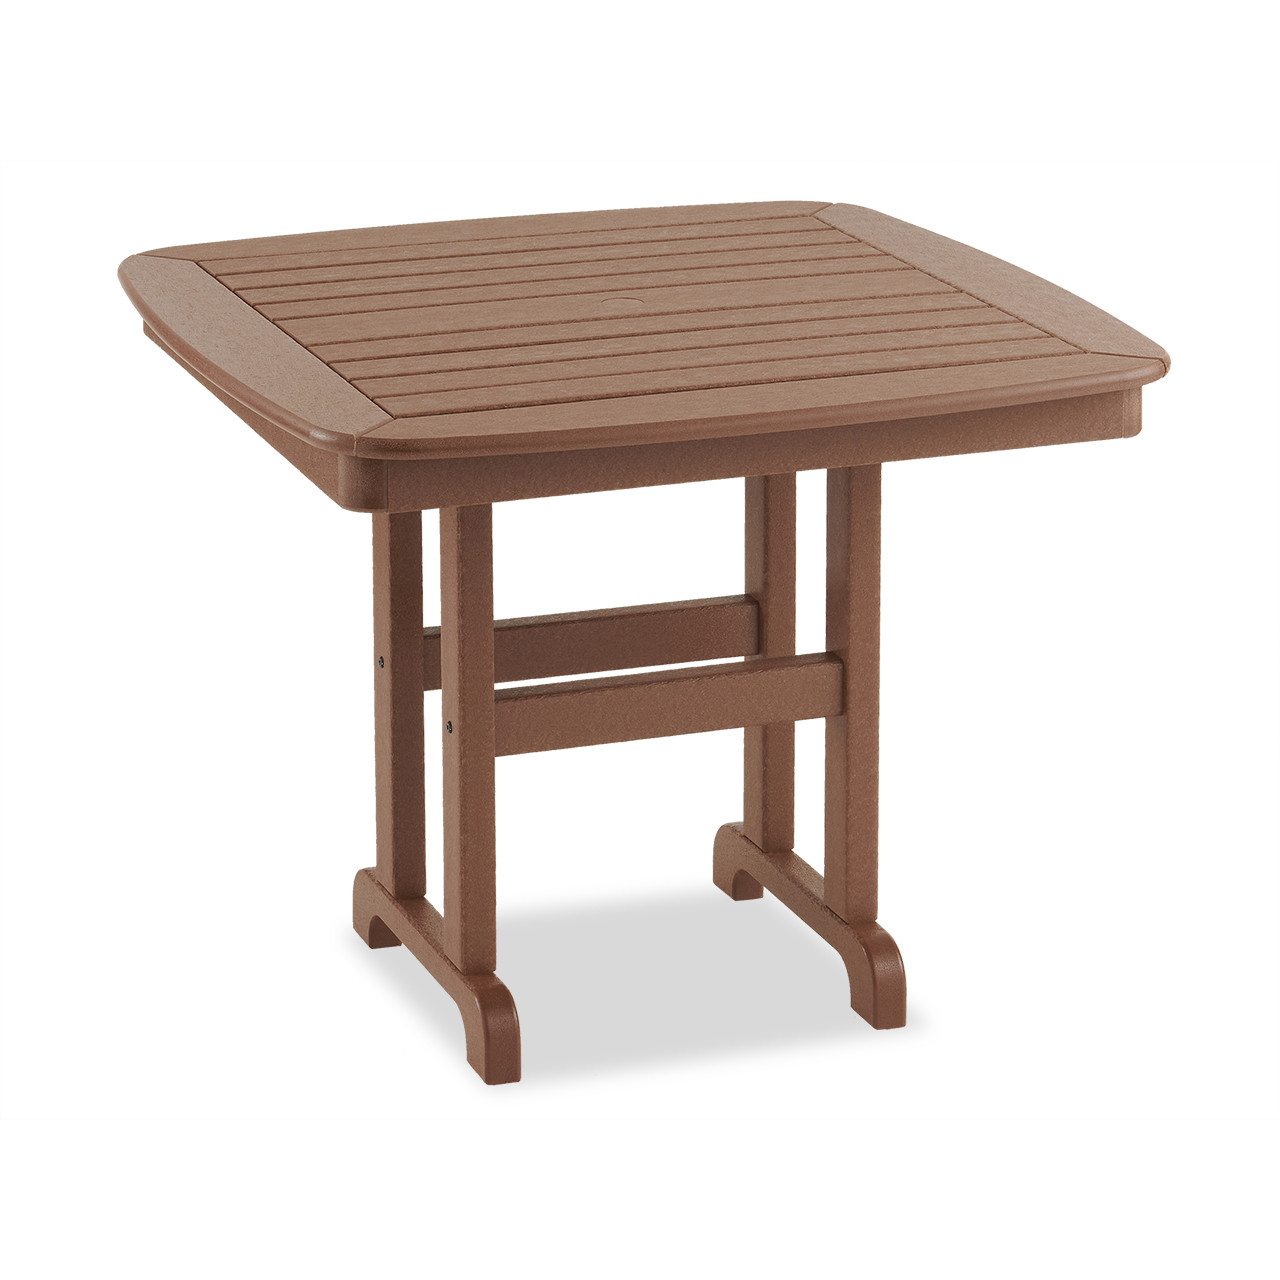 Surfside Polymer 37 in. Sq. Dining Table